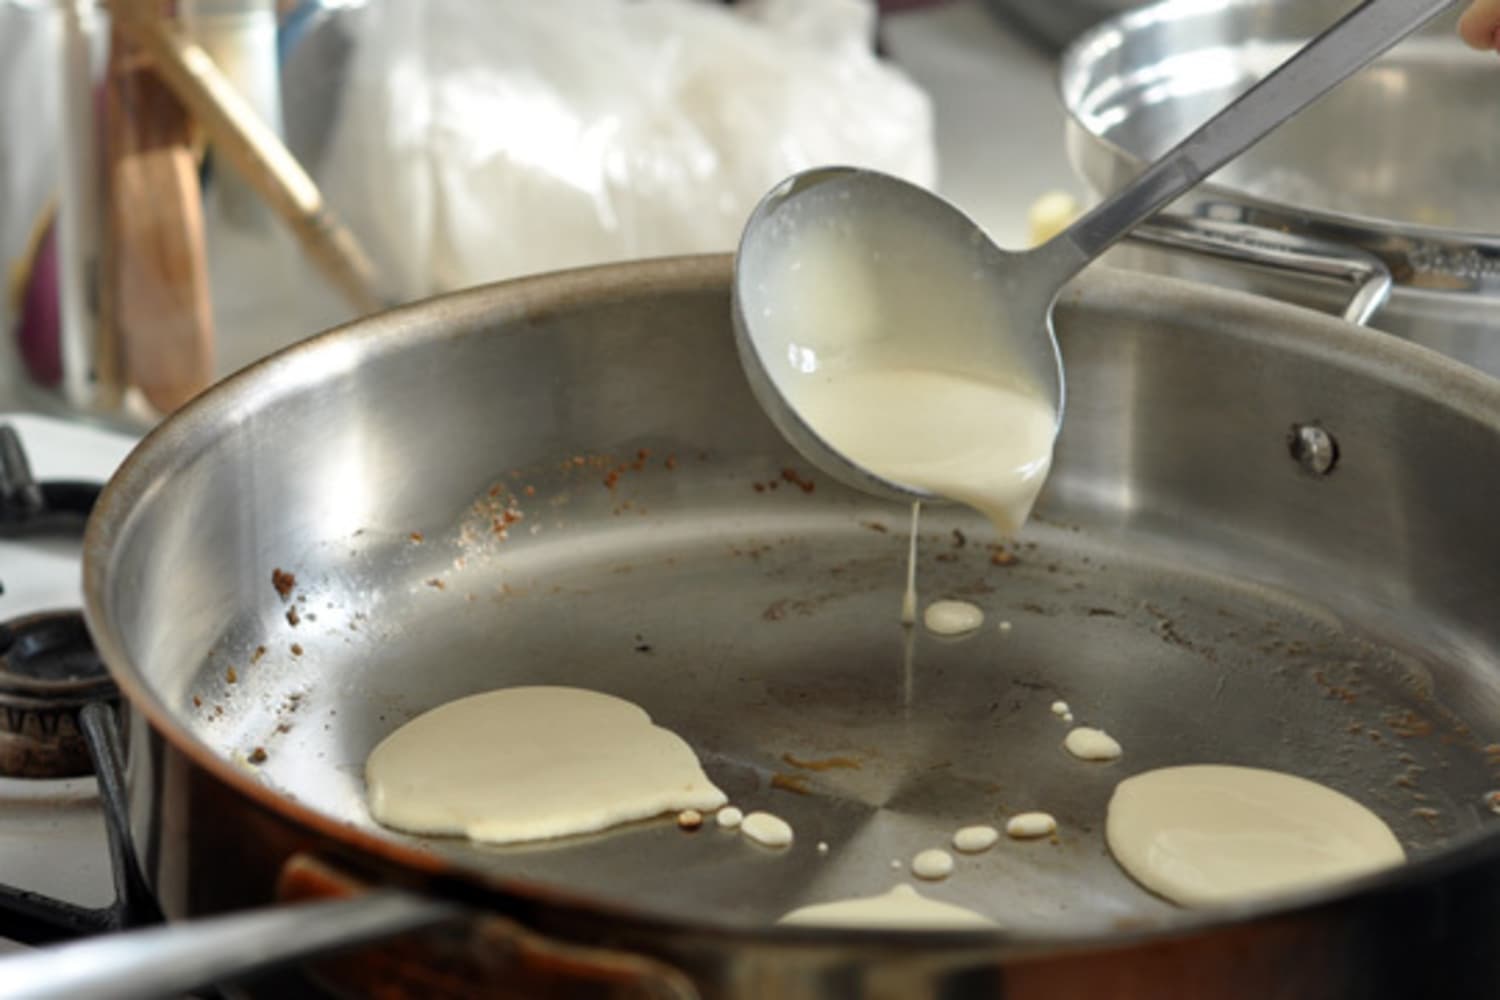 Cooking Pancakes On Stainless Steel Pan How To Wiki 